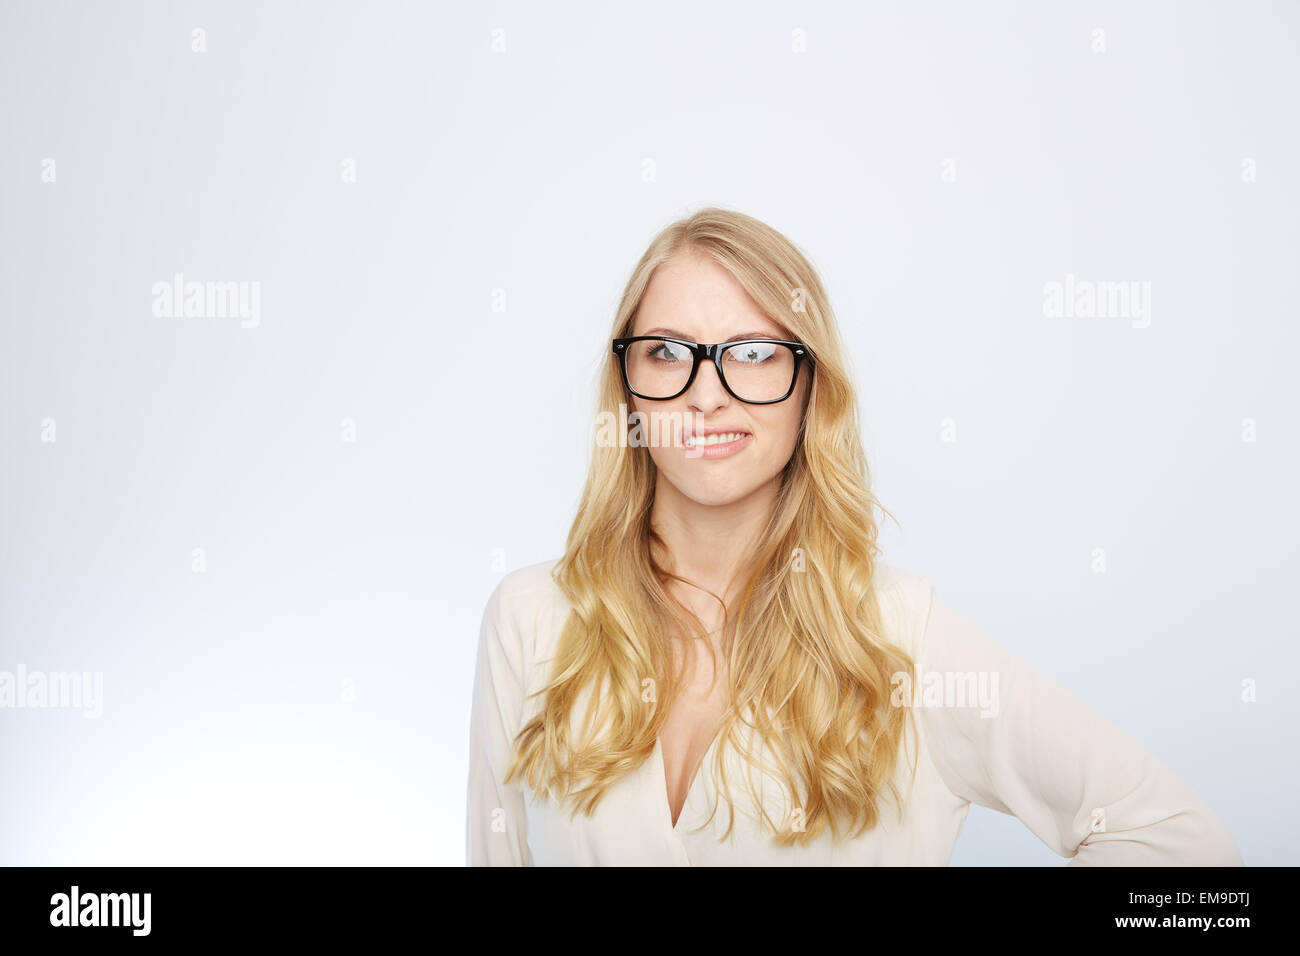 Blonde With Nerdy Glasses 